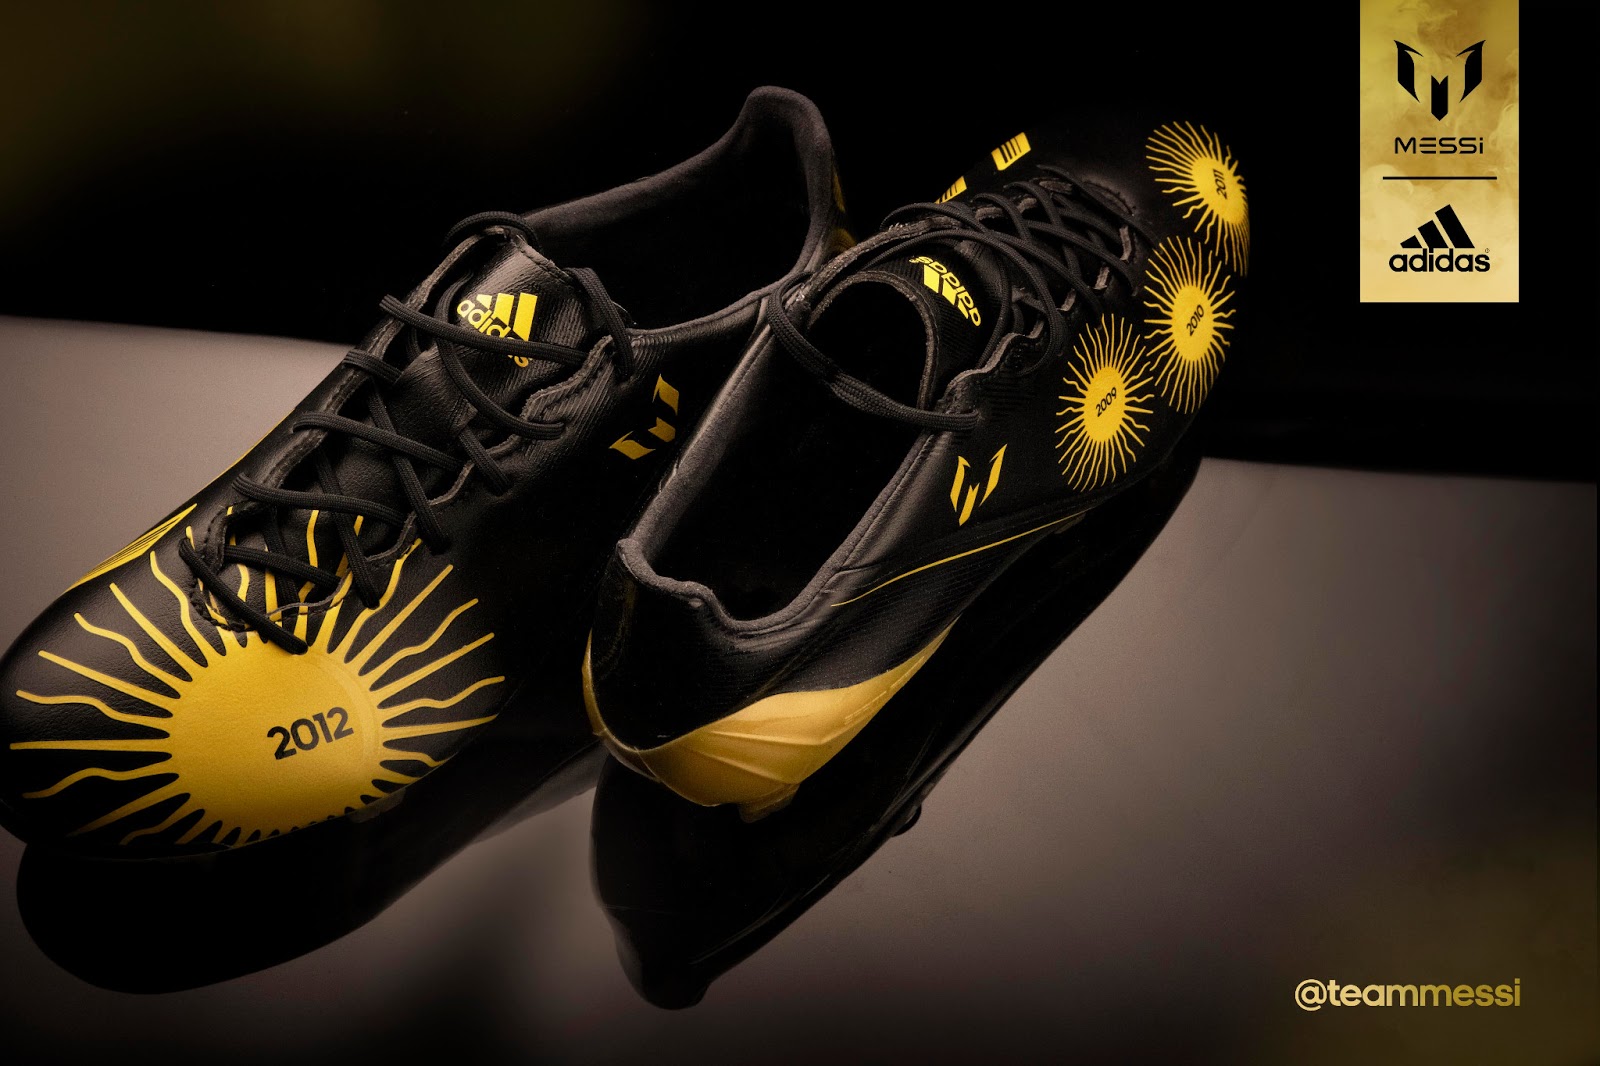 Messi Exclusive Ballon d'Or 2012 Boots Unveiled - Footy Headlines